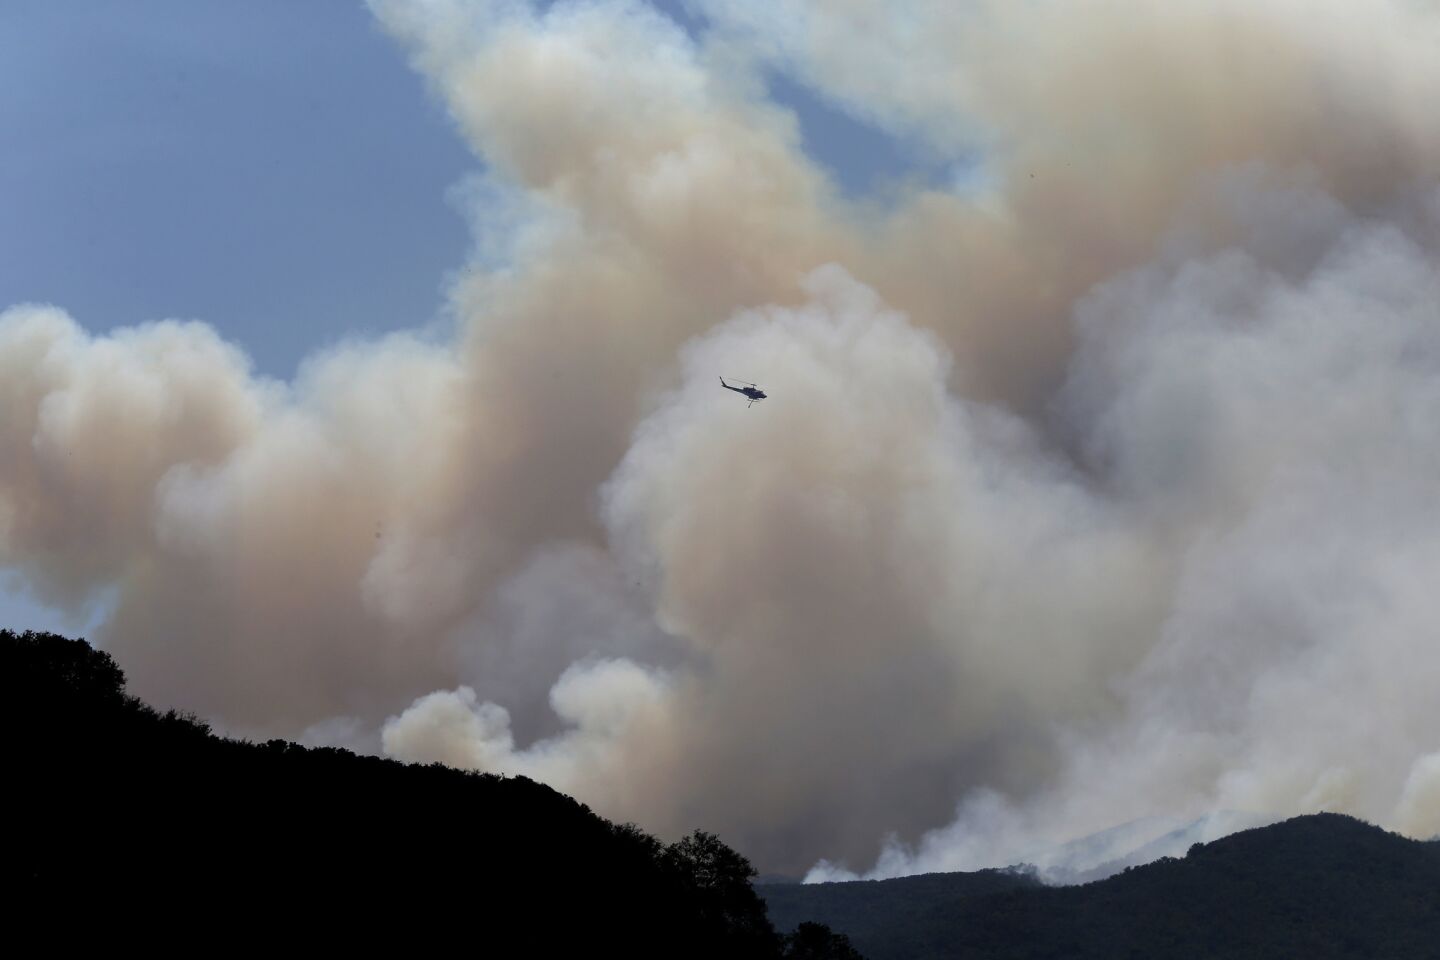 A firefighting helicopter gets into position to make a water drop on the Whittier fire as it burns toward State Route 154 in the Los Padres National Forest near Lake Cachuma.